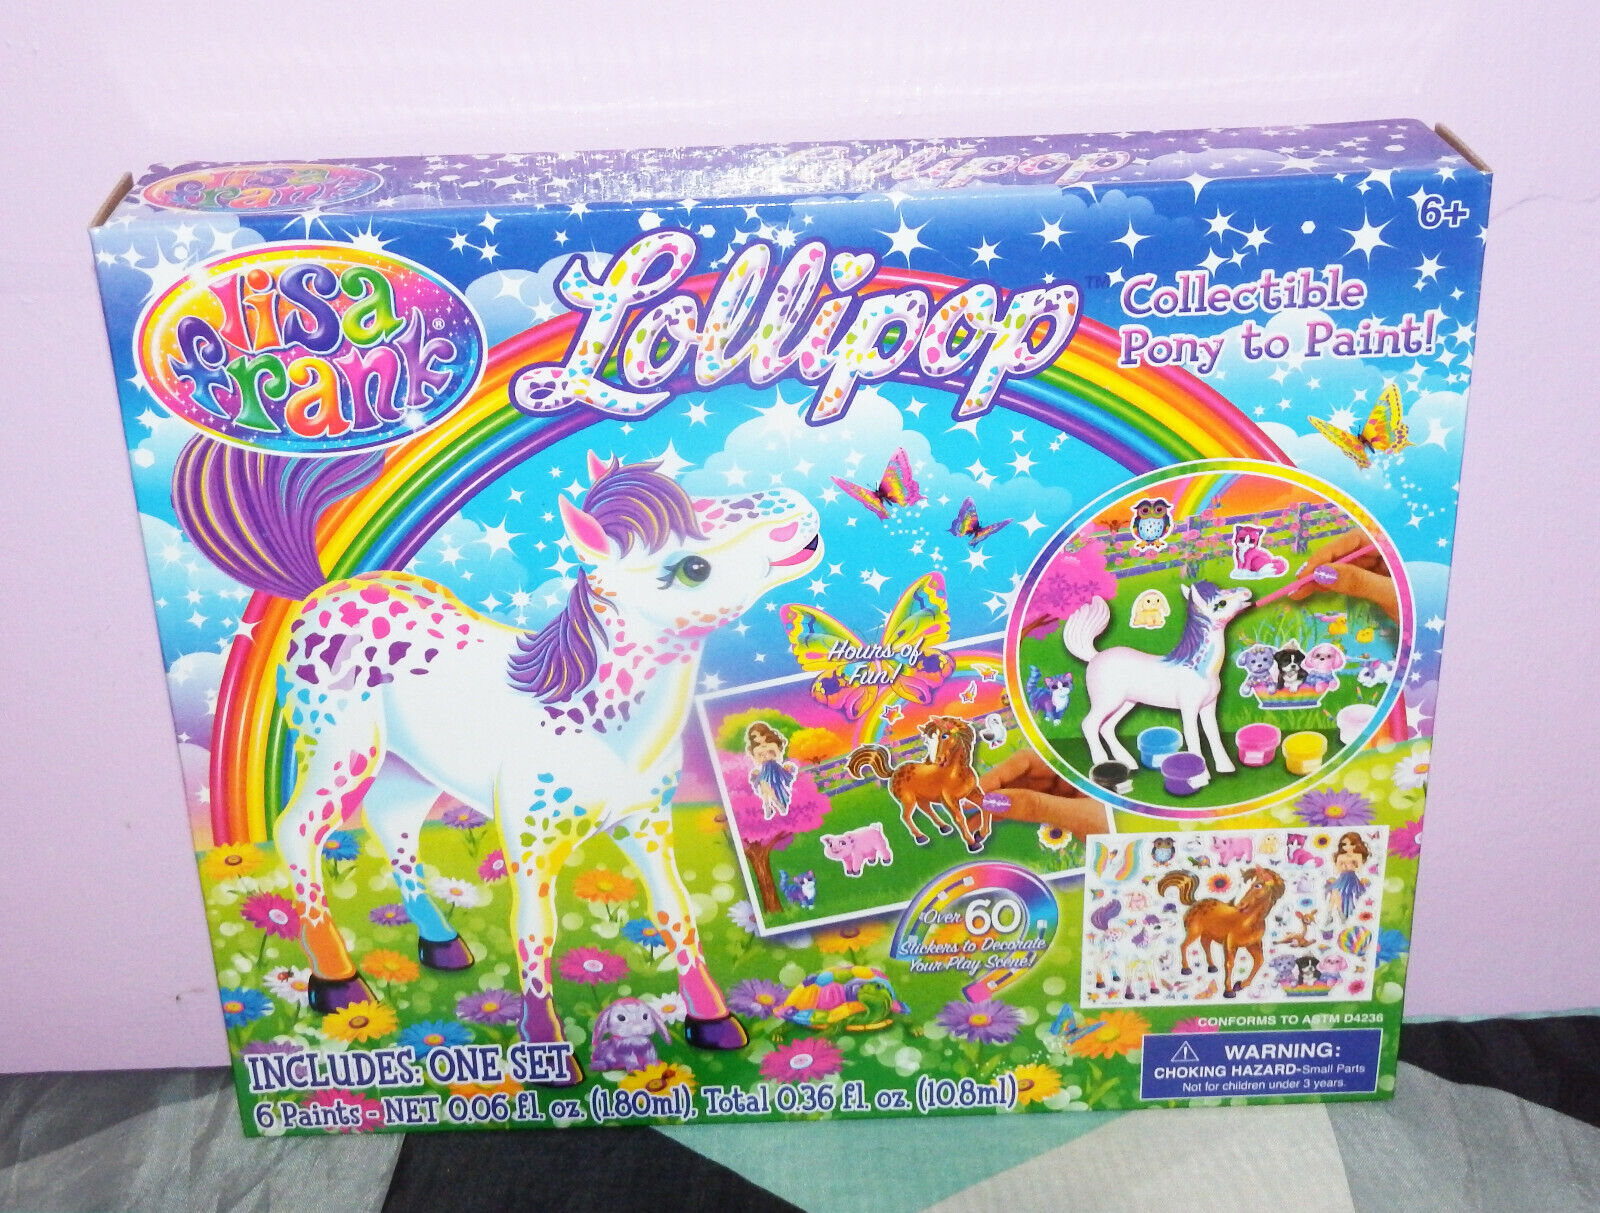 New Lisa Frank Lollipop Collectible Pony To Paint *Read Listing*